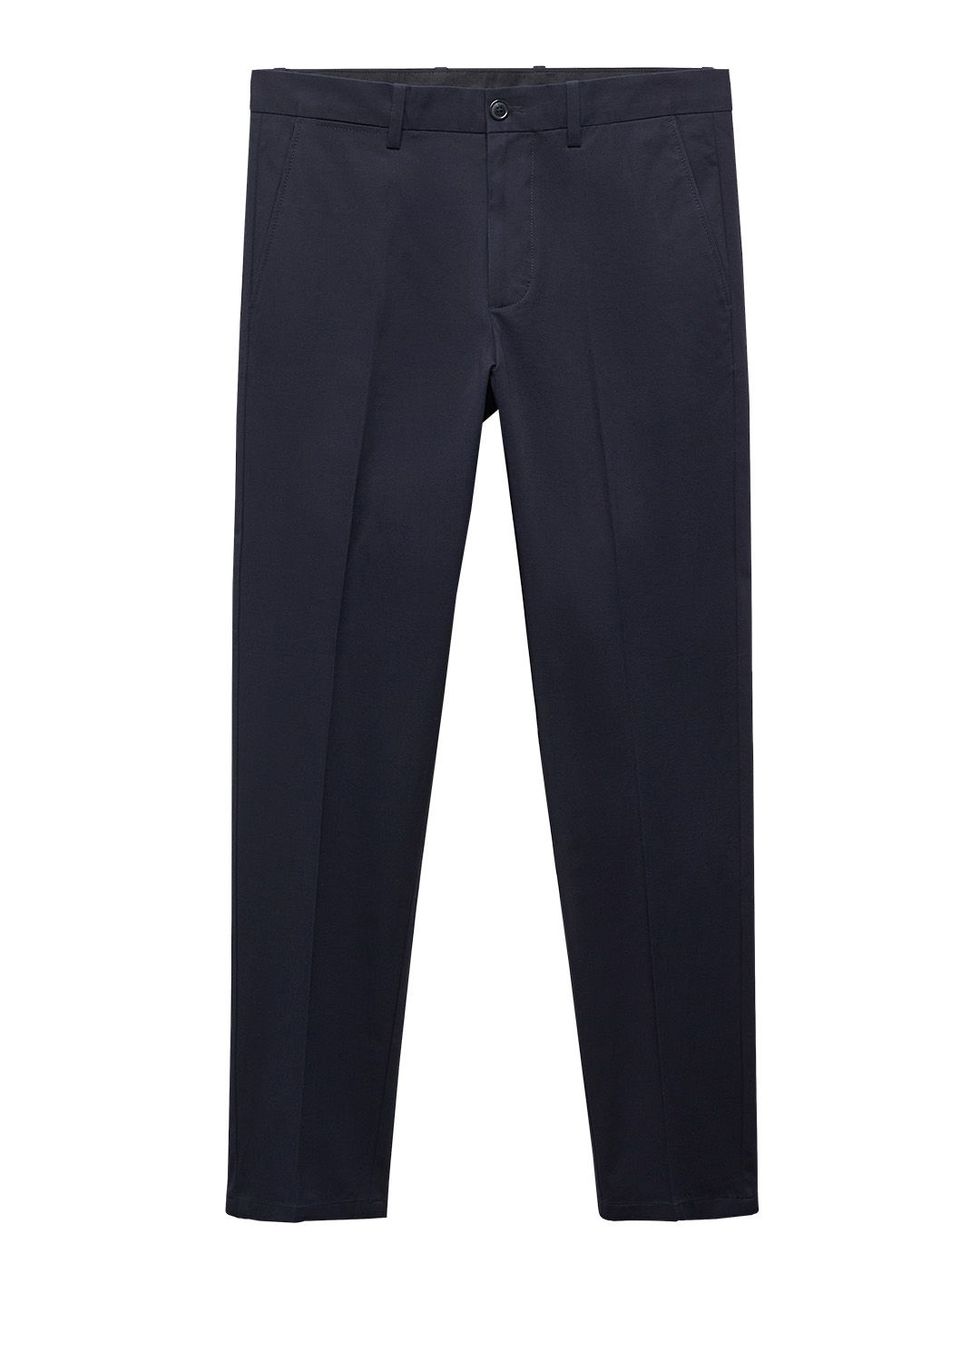 Regular fit cotton trousers